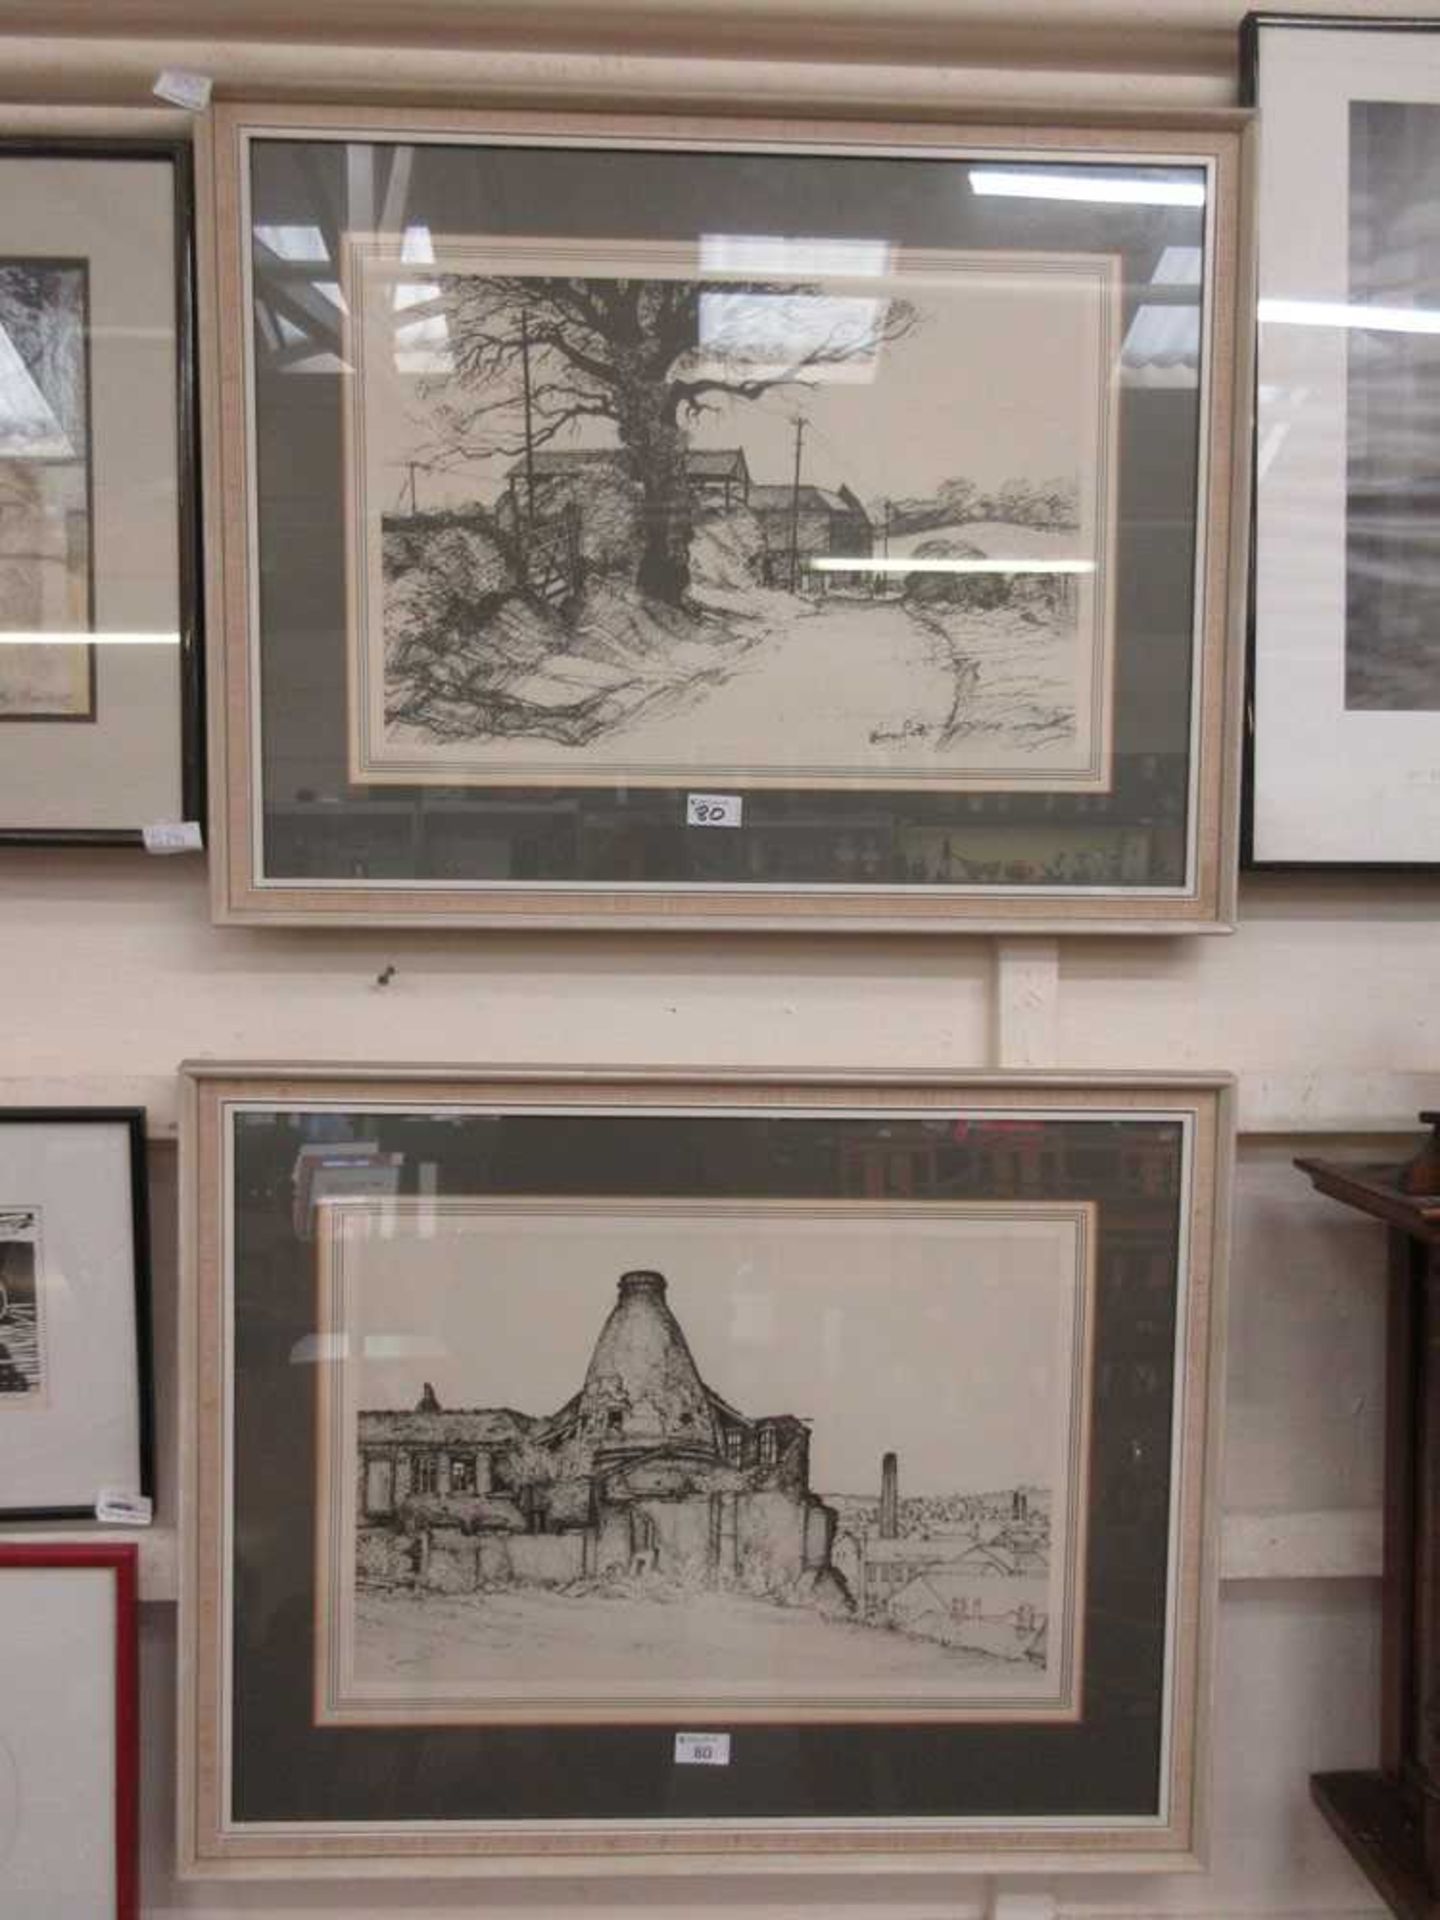 Two framed and glazed monochrome prints of Oeste House and country lane after Harry Smith